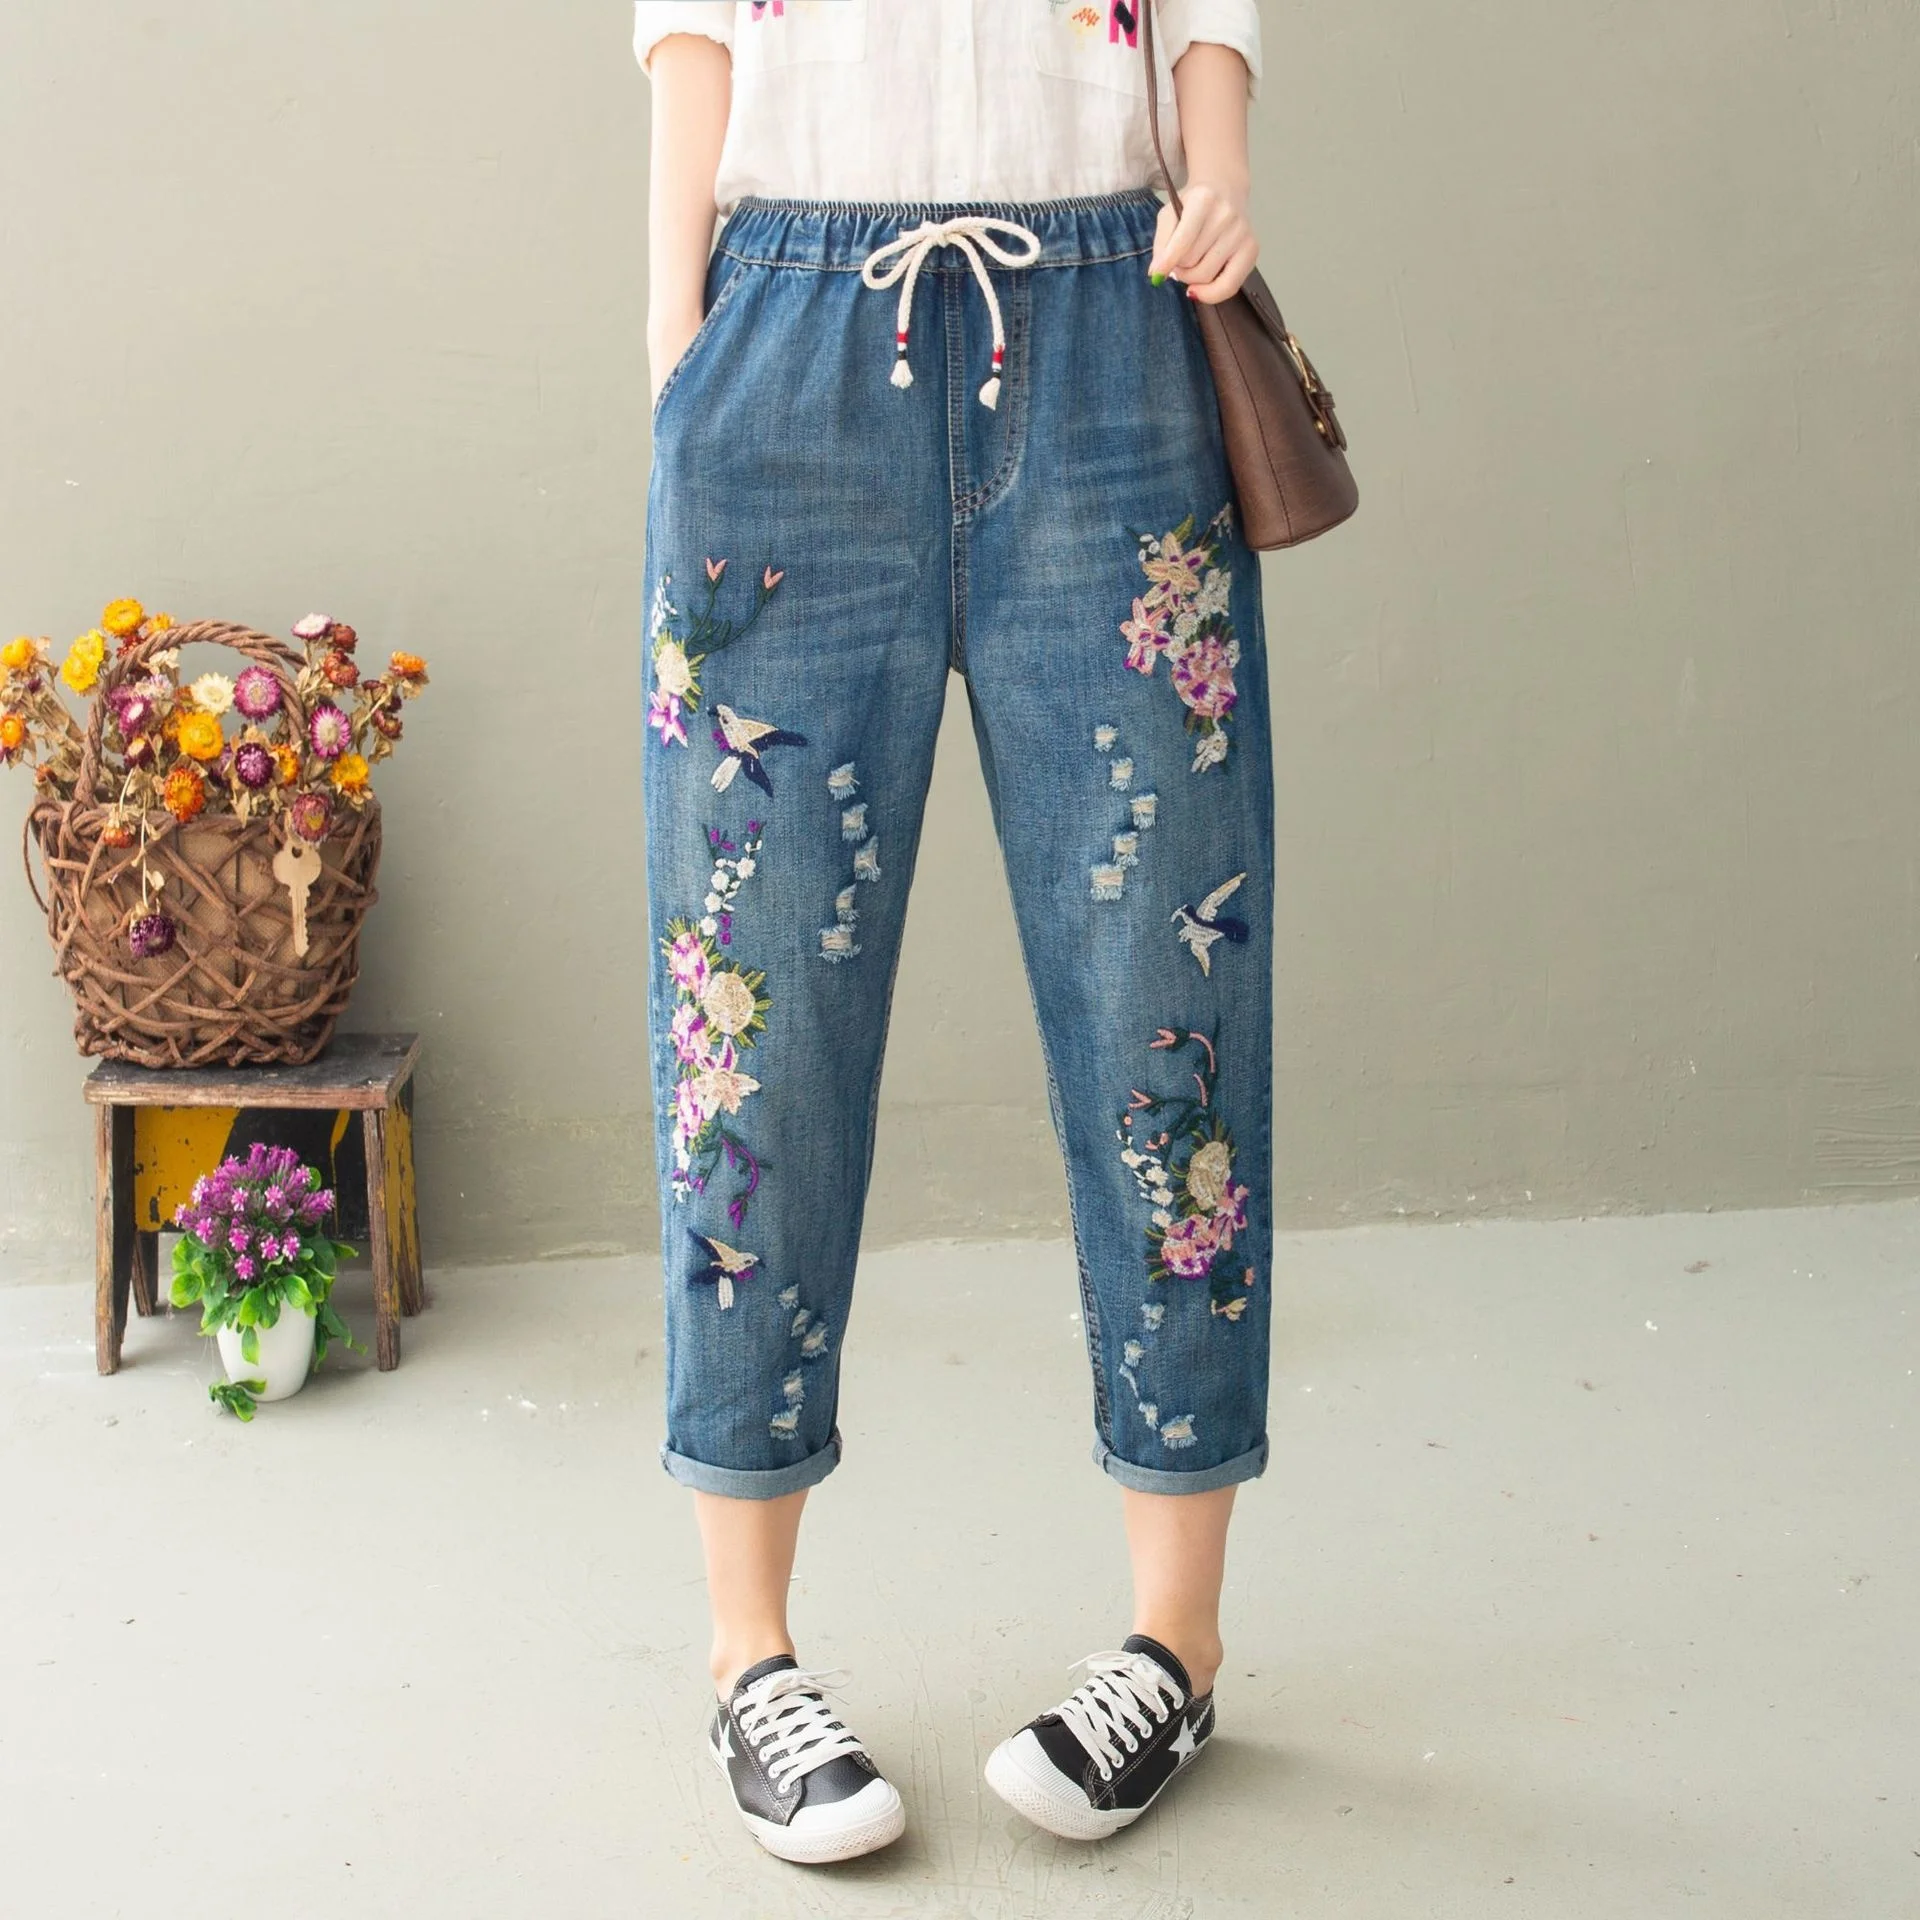 ripped jeans Elastic Waist Jeans Ladies Vintage Embroidery Trousers Women Casual Retro Floral Denim Cowboy Ripped Harem Pants Yalabovso jeans pant